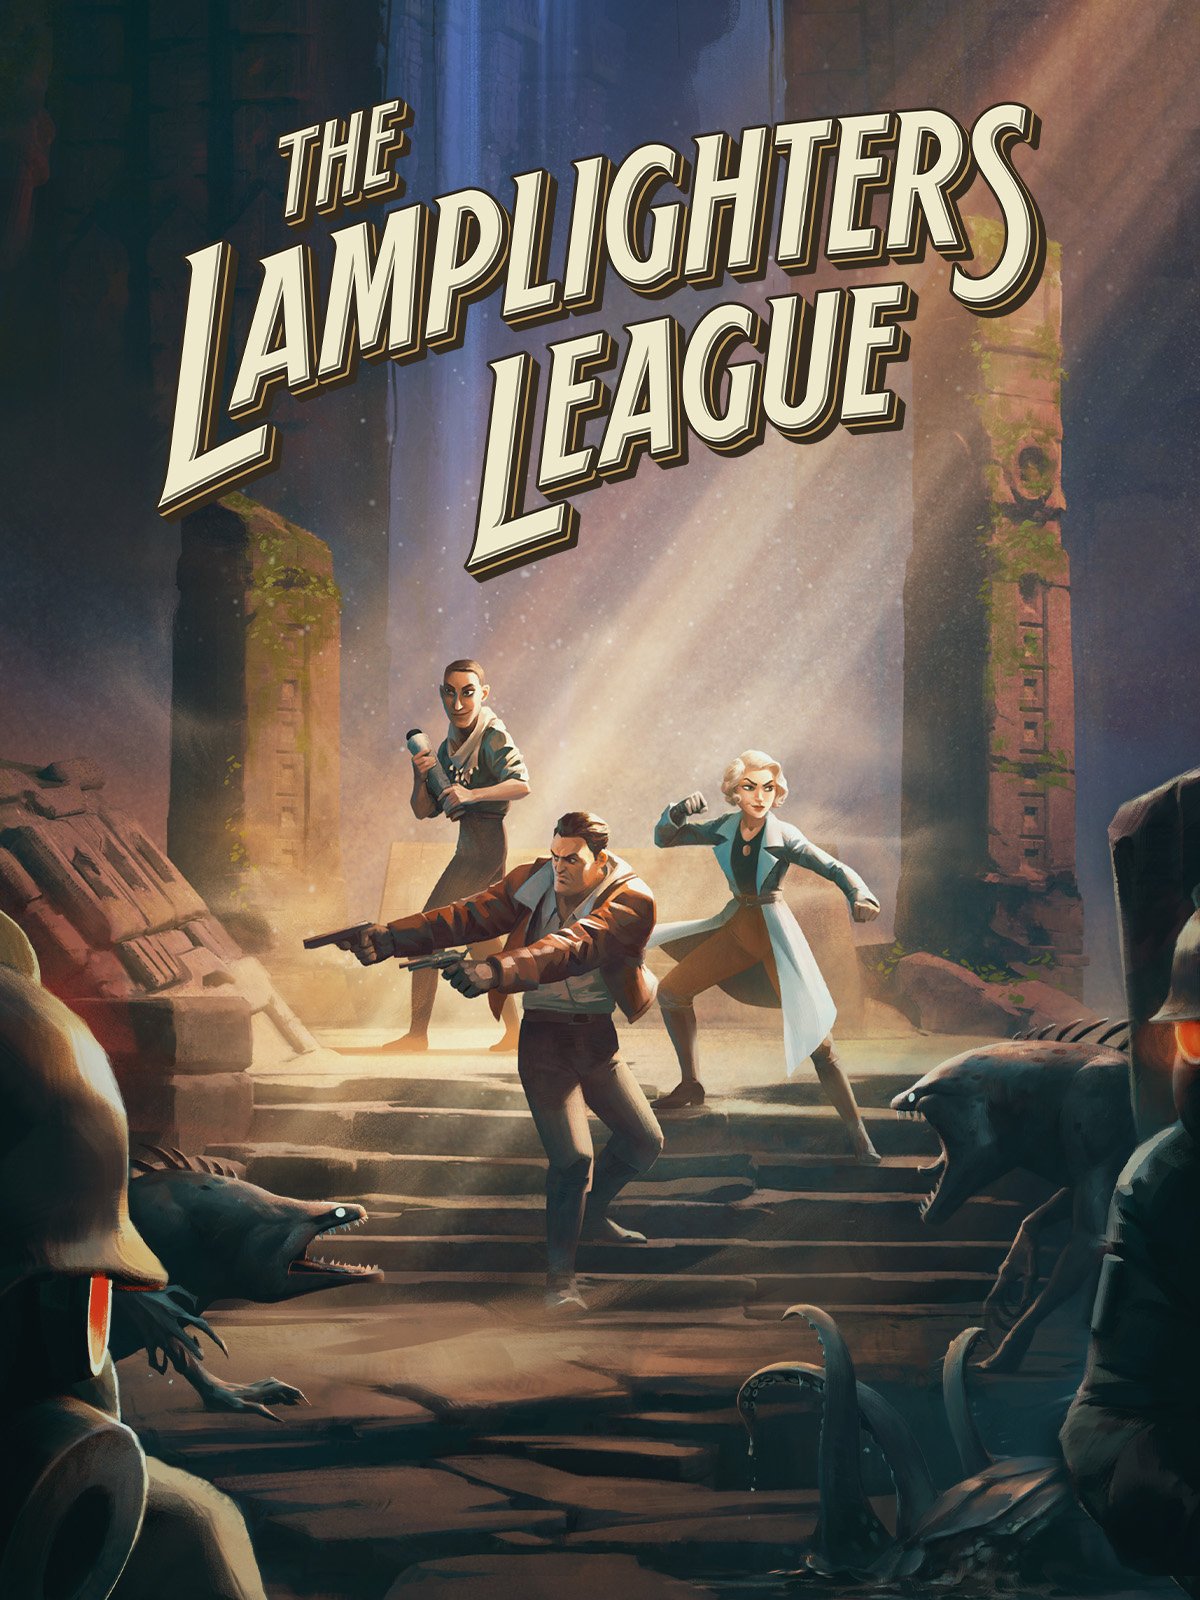 download the new version for ios The Lamplighters League